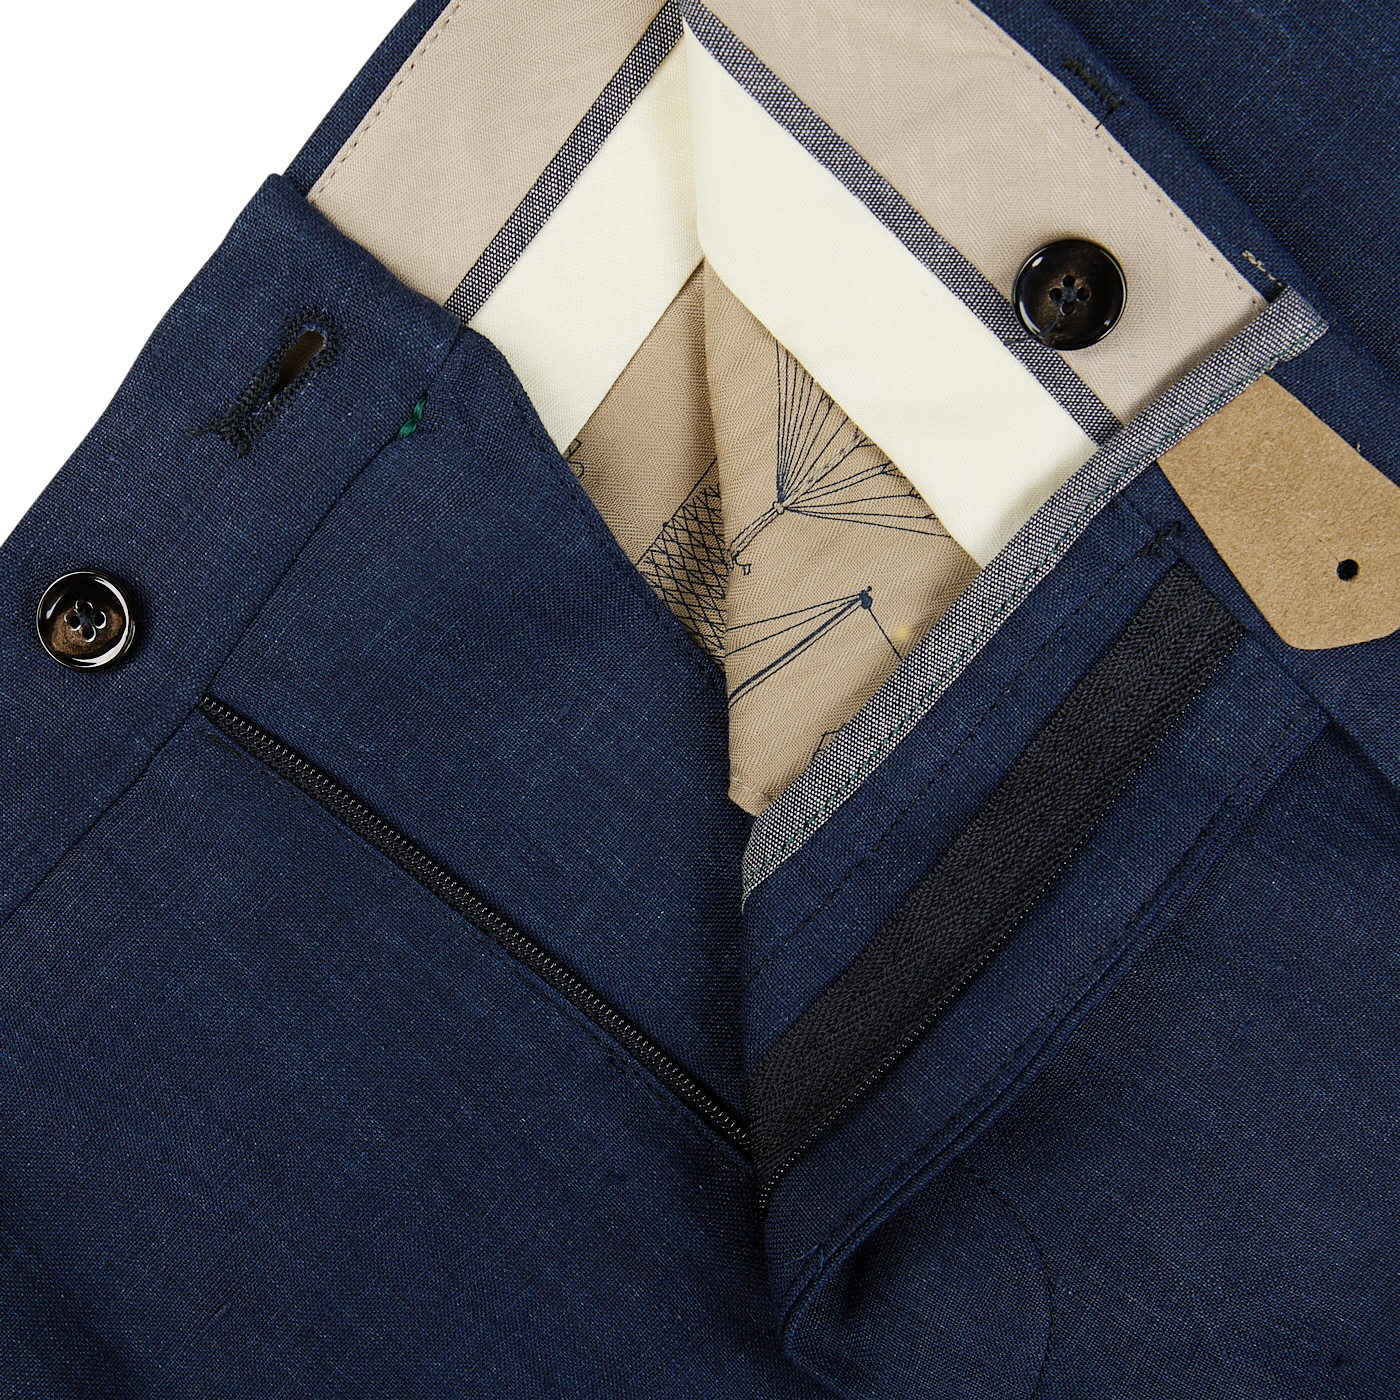 Close-up of a folded blue Berwich men's dress shirt with a price tag, showcasing its collar, button, and inner lining details alongside Navy Blue Melange Linen Flat Front Trousers.